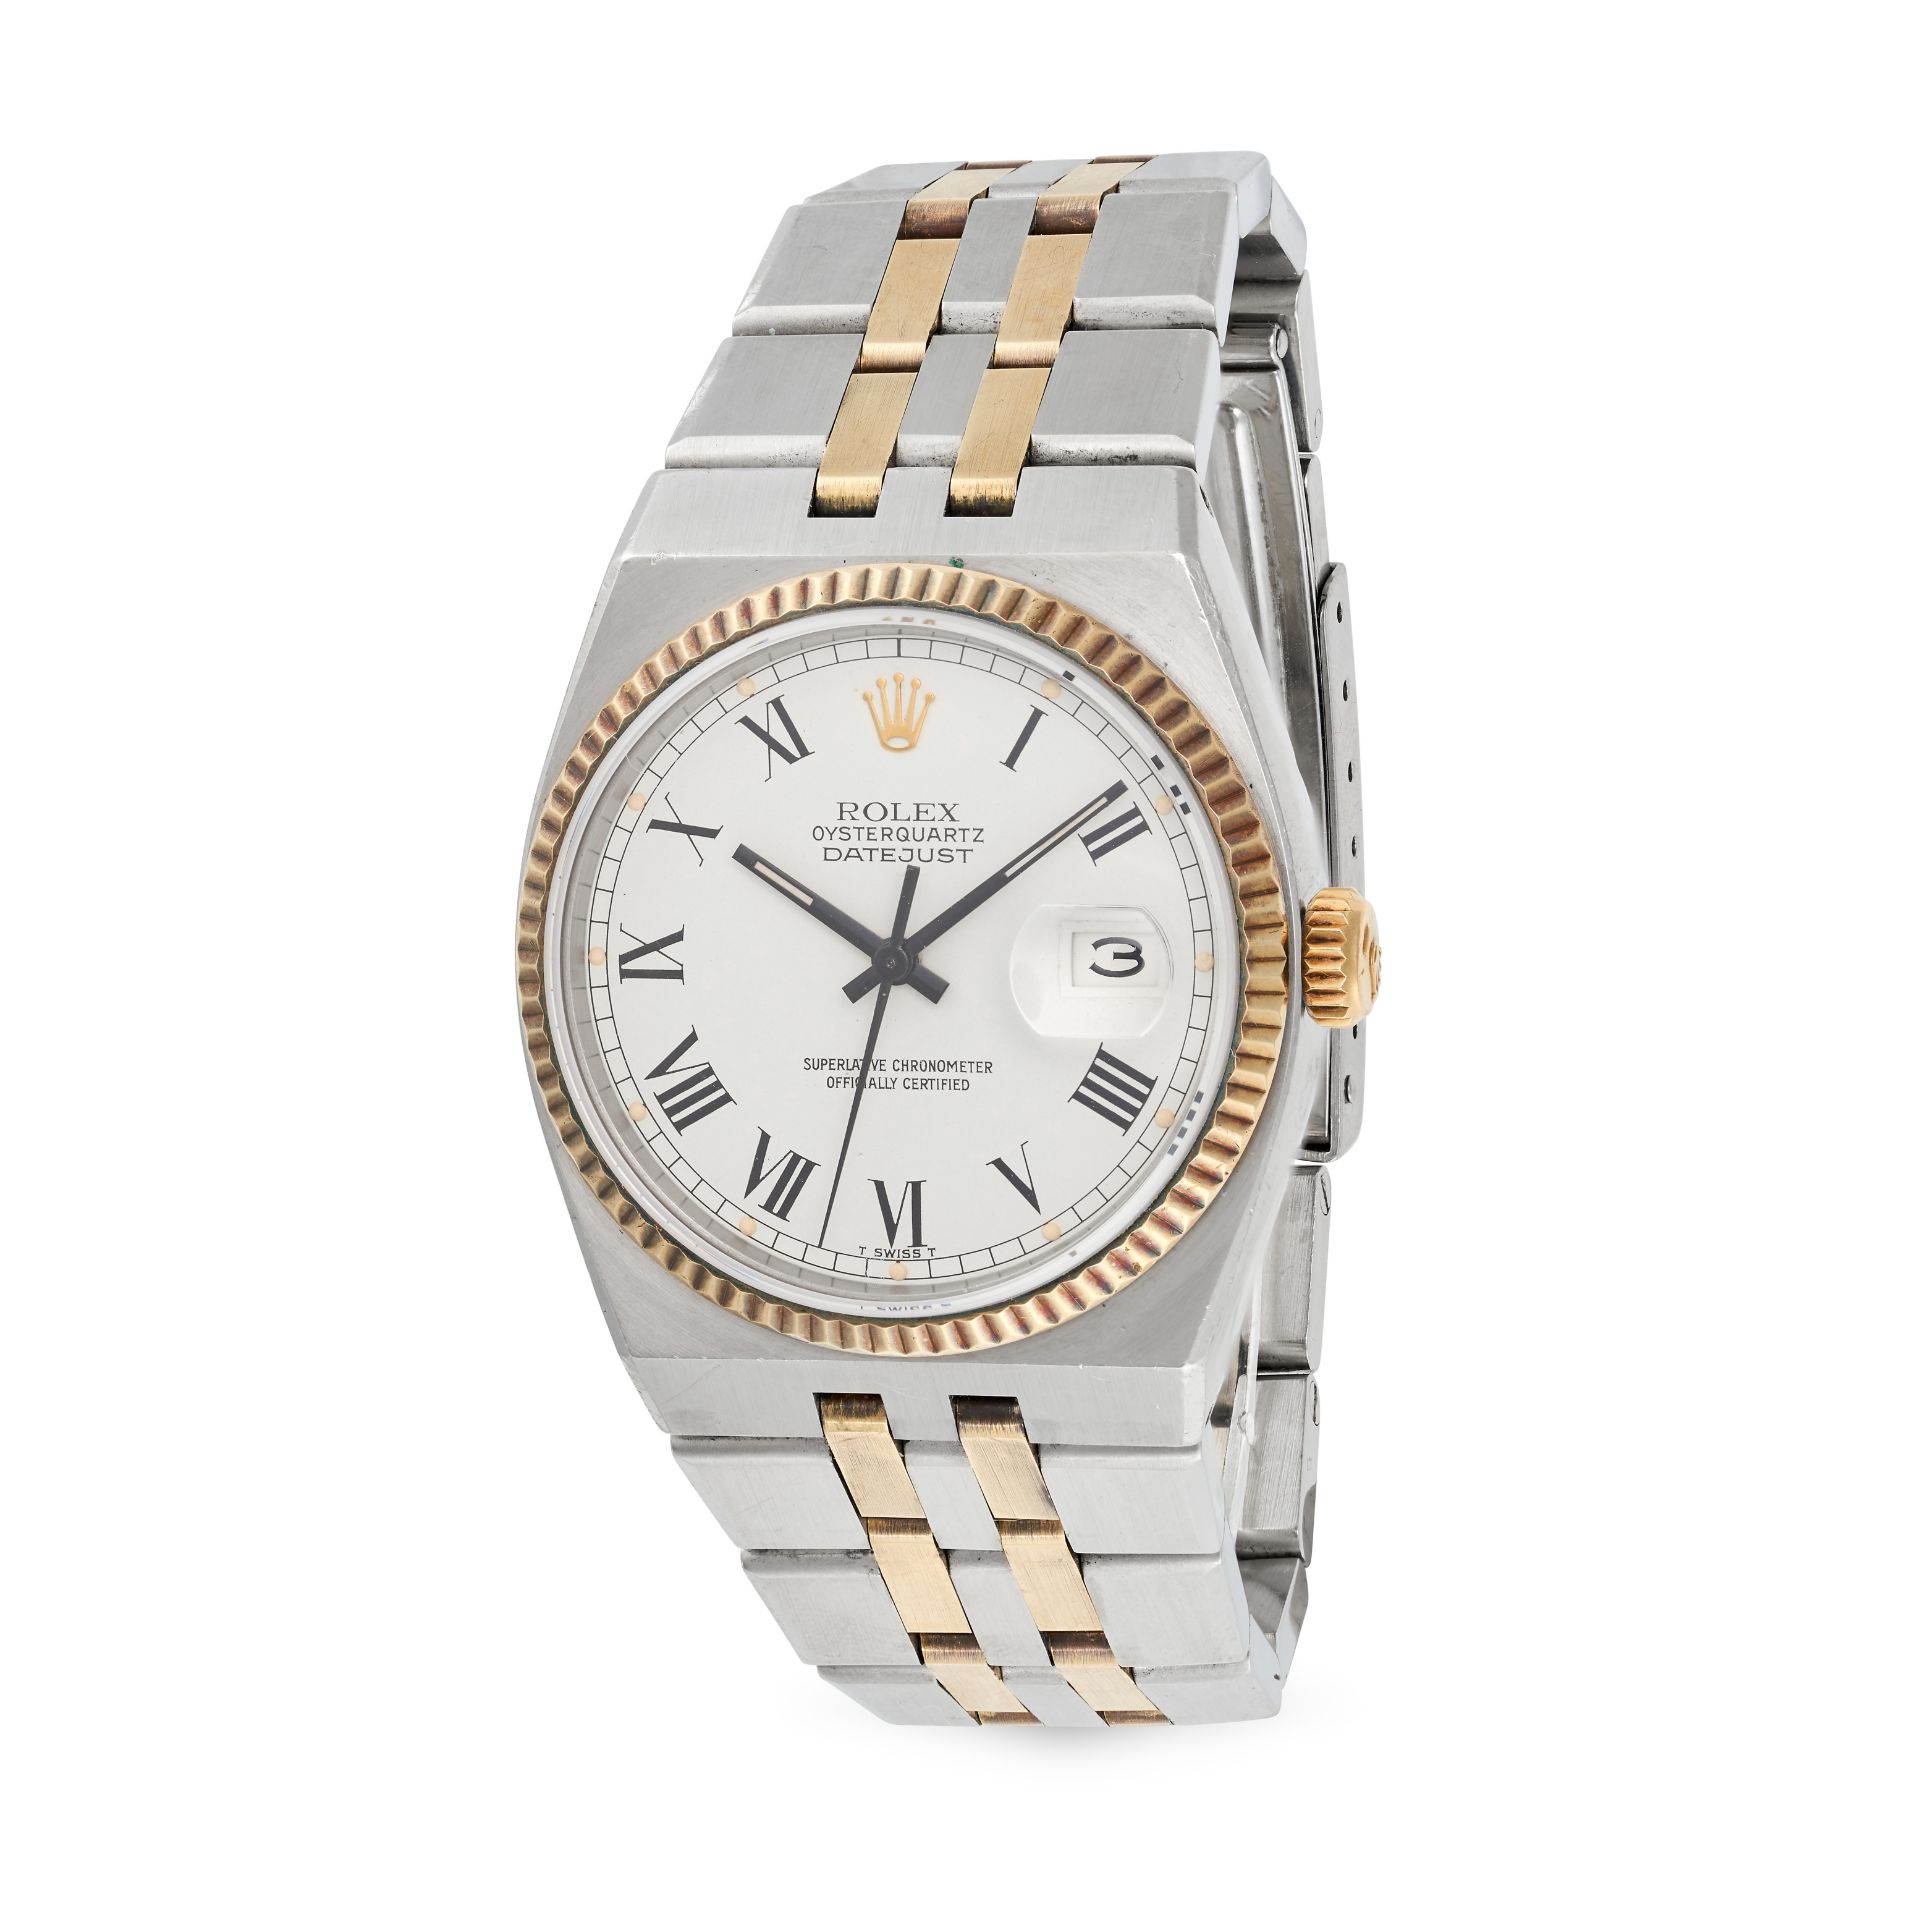 ROLEX - A VINTAGE BIMETAL ROLEX OYSTERQUARTZ DATEJUST in stainless steel and gold, the circular c...